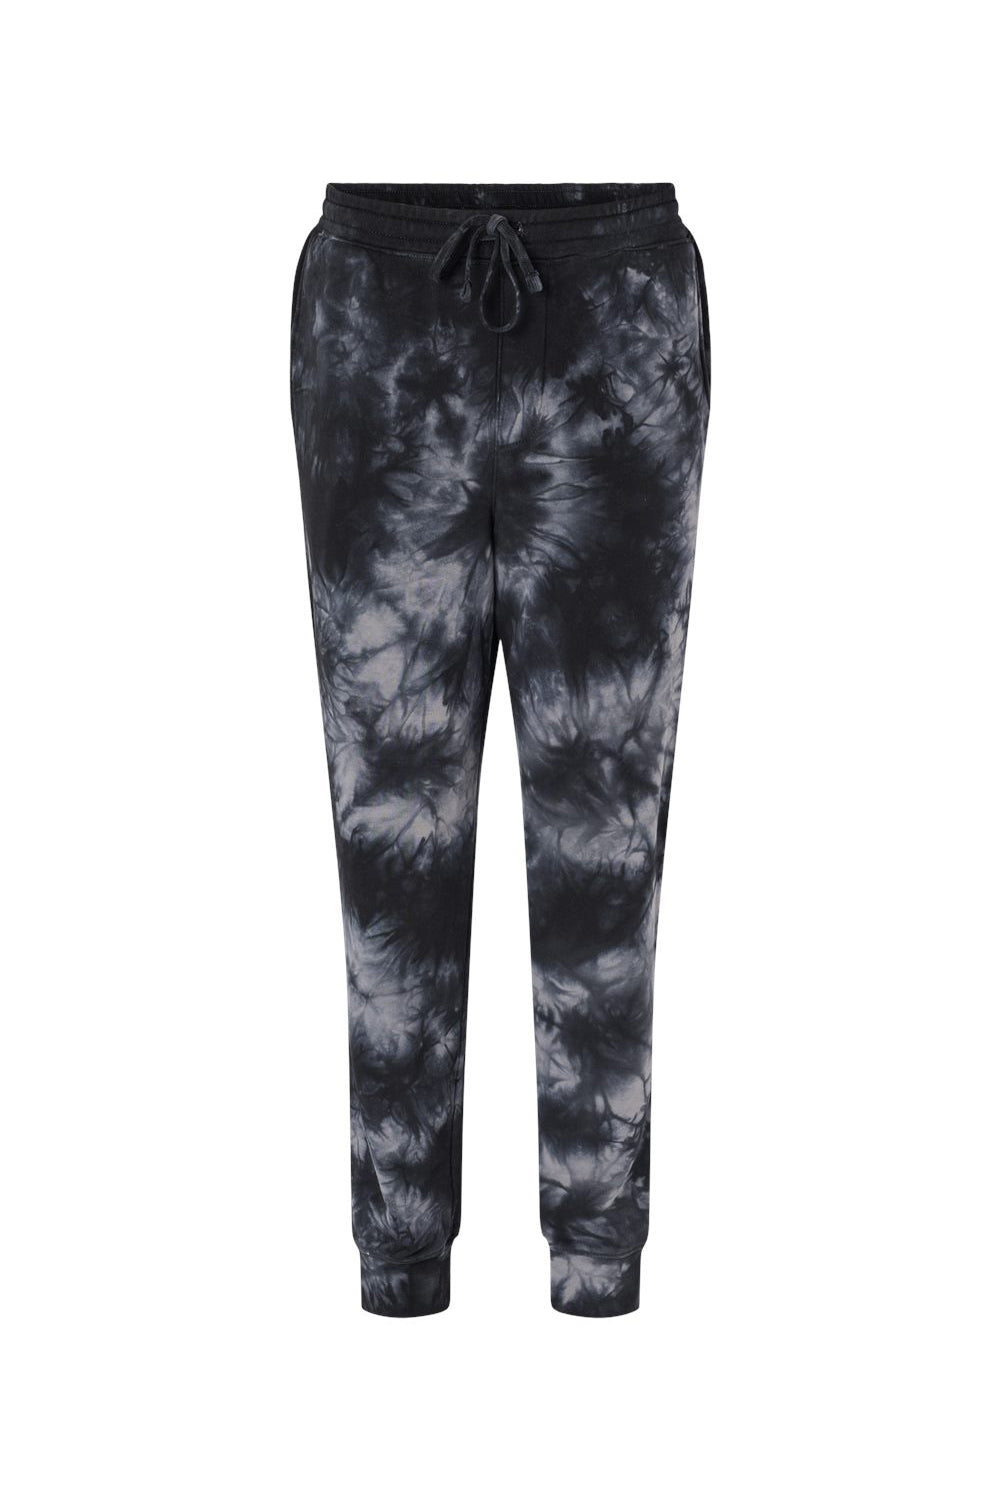 Independent Trading Co. PRM50PTTD Mens Tie-Dye Fleece Sweatpants w/ Pockets Black Flat Front